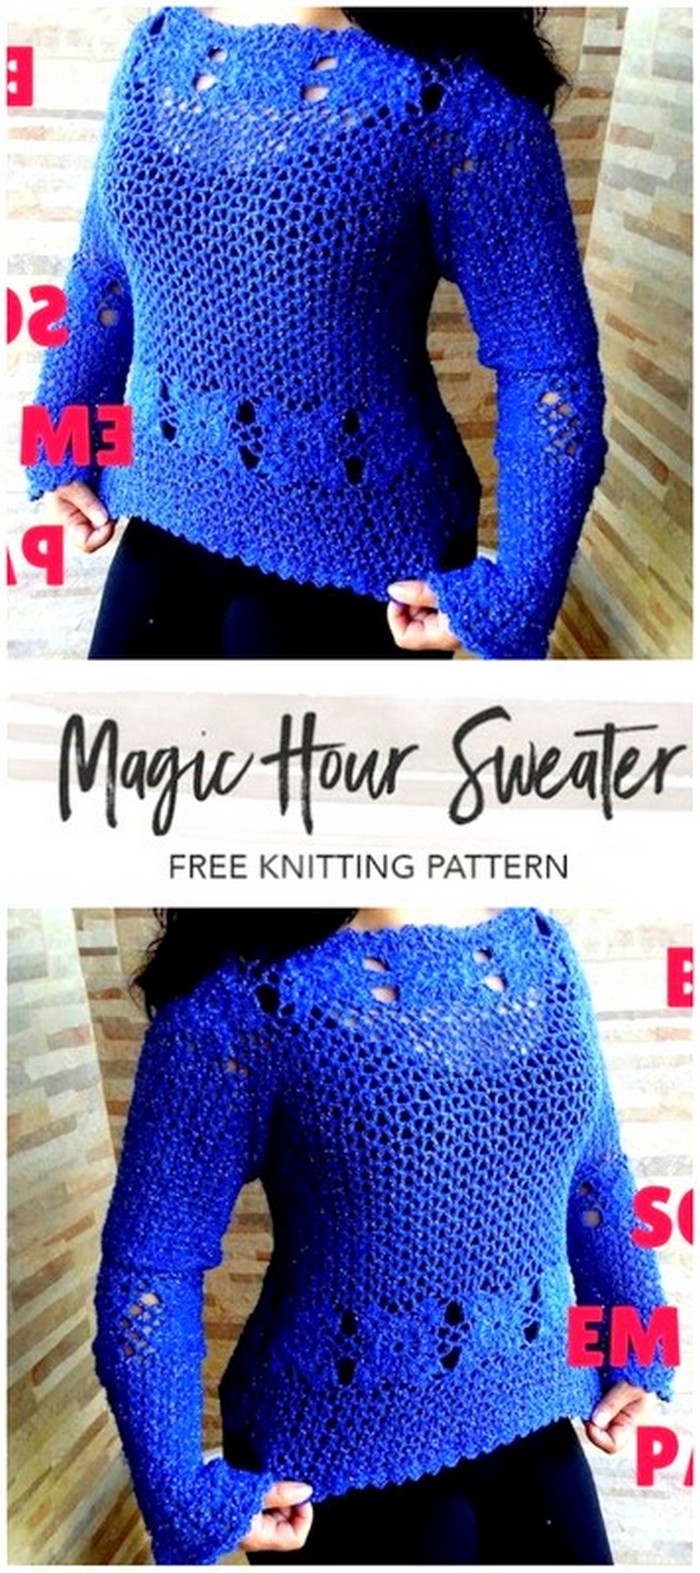 notable Sweater crochet pattern with step pictures